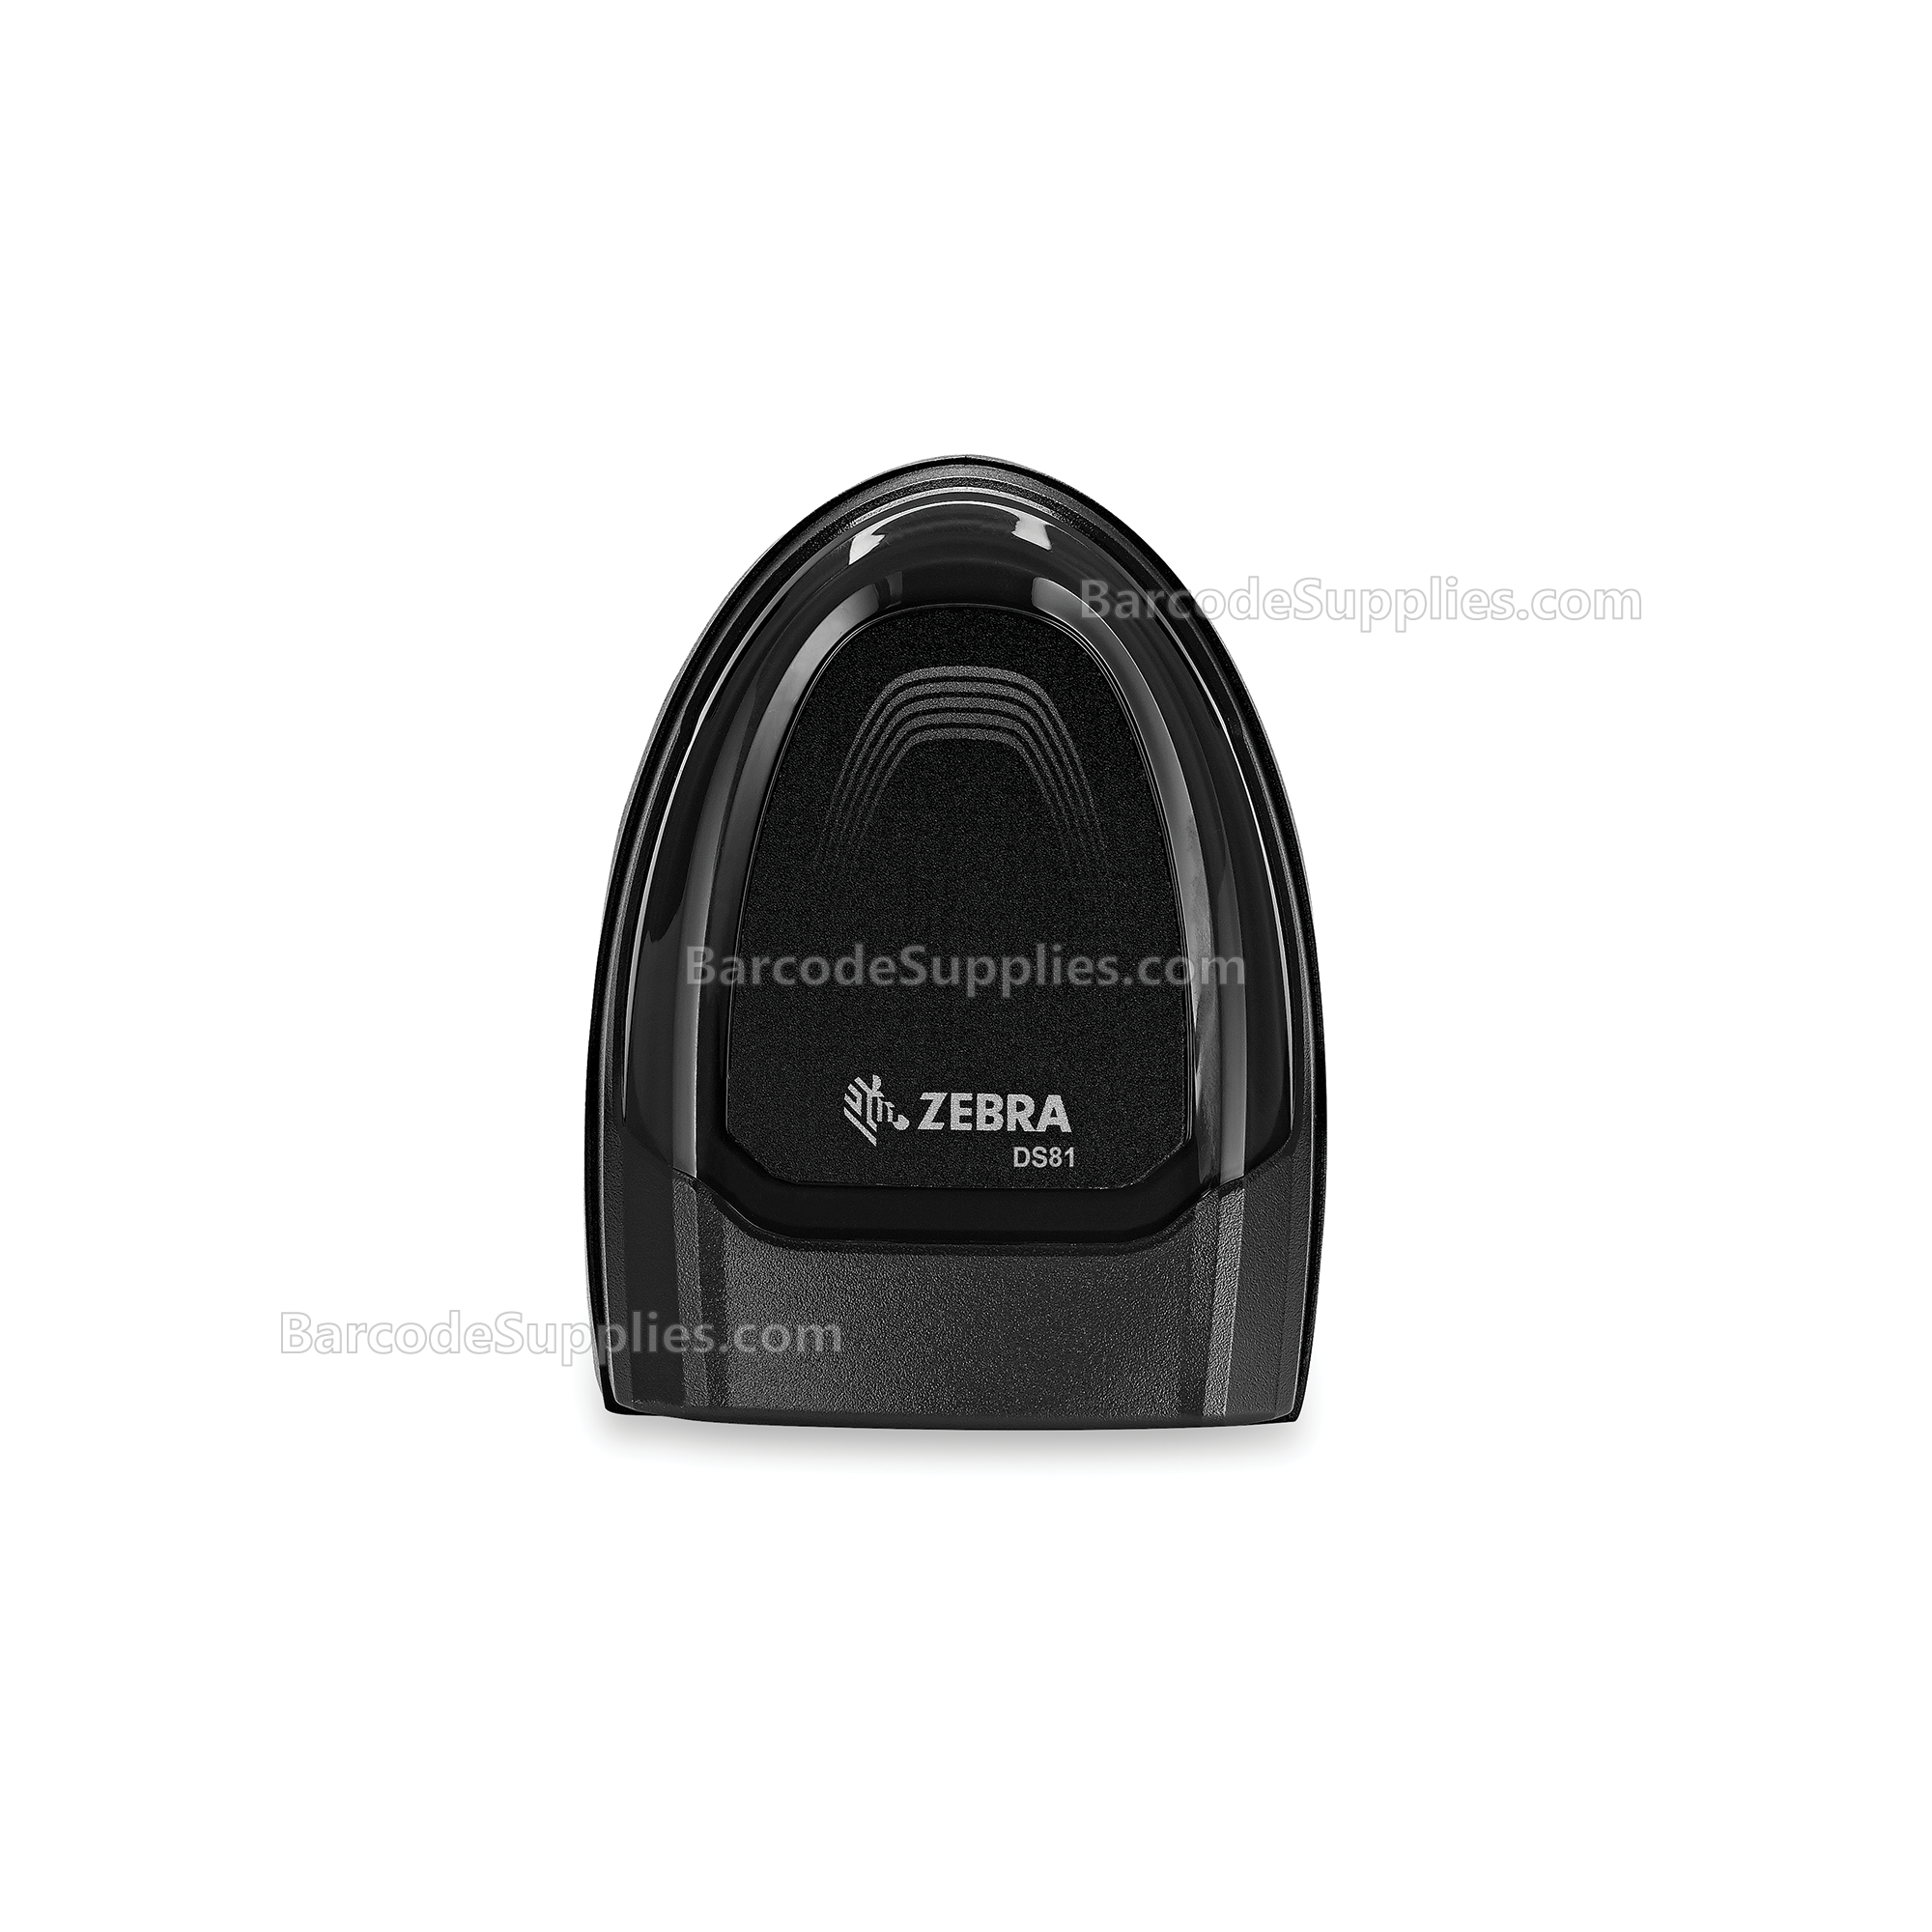 DS8108-DL Black (with Stand) USB KIT: DS8108-DL00007ZZWW Scanner, CBA-U21-S07ZBR Shielded USB Cable, 20-71043-04R Stand